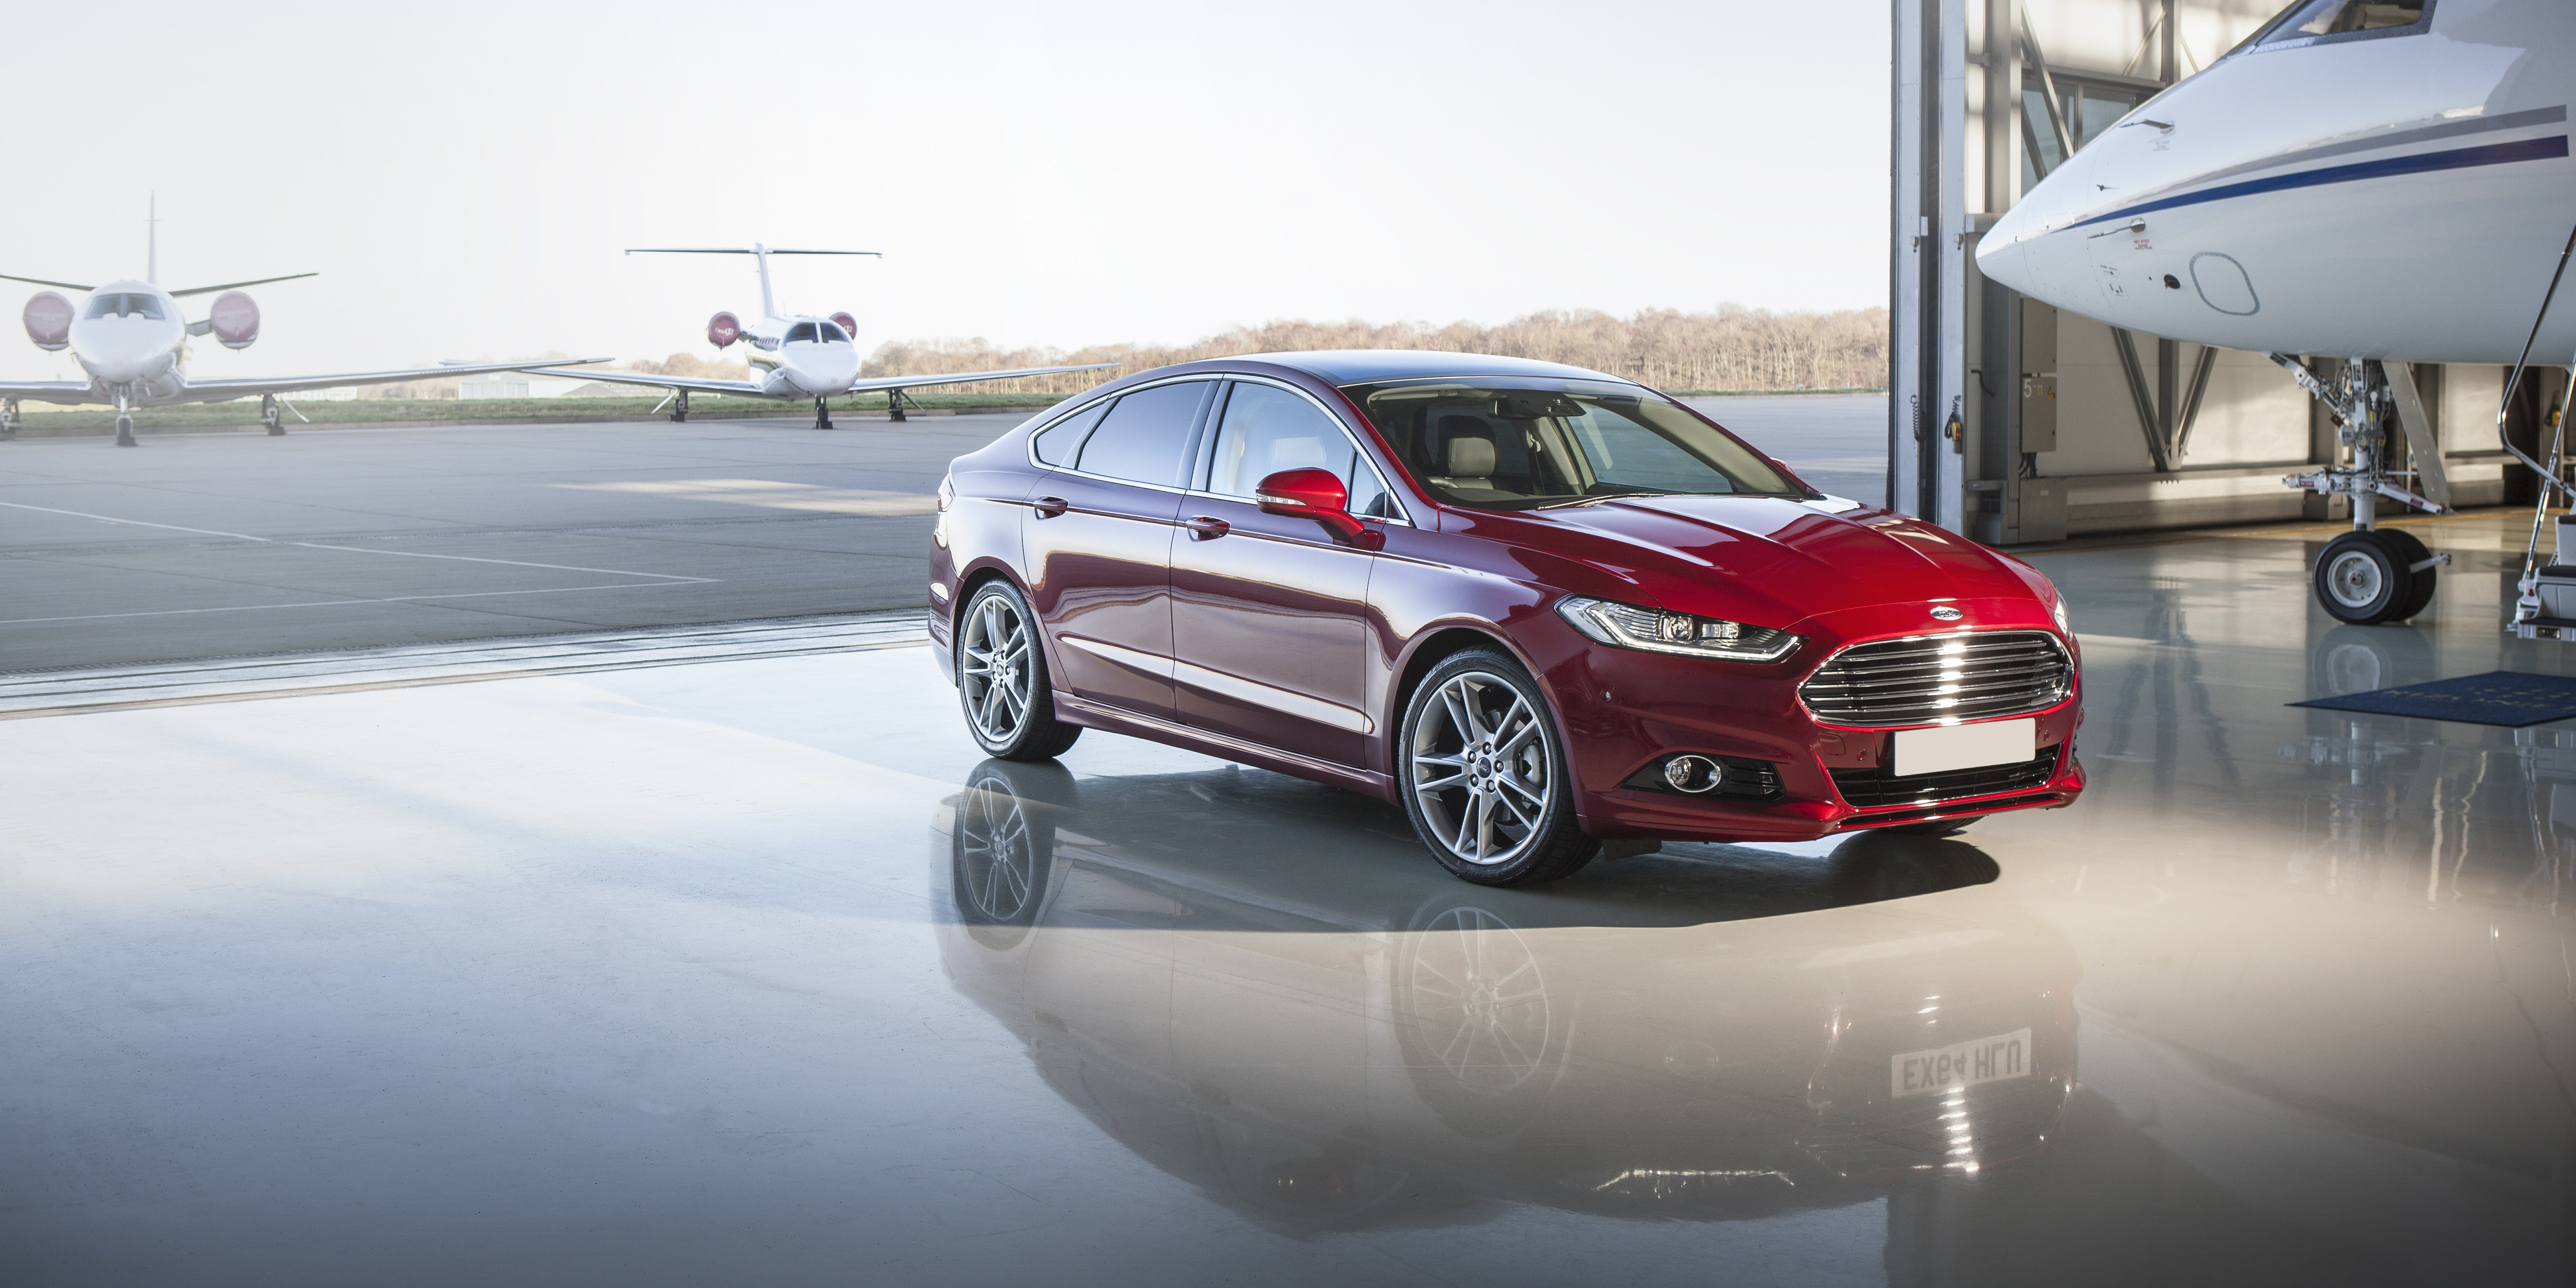 Used Ford Mondeo Hatchback (2014 - 2022) Review